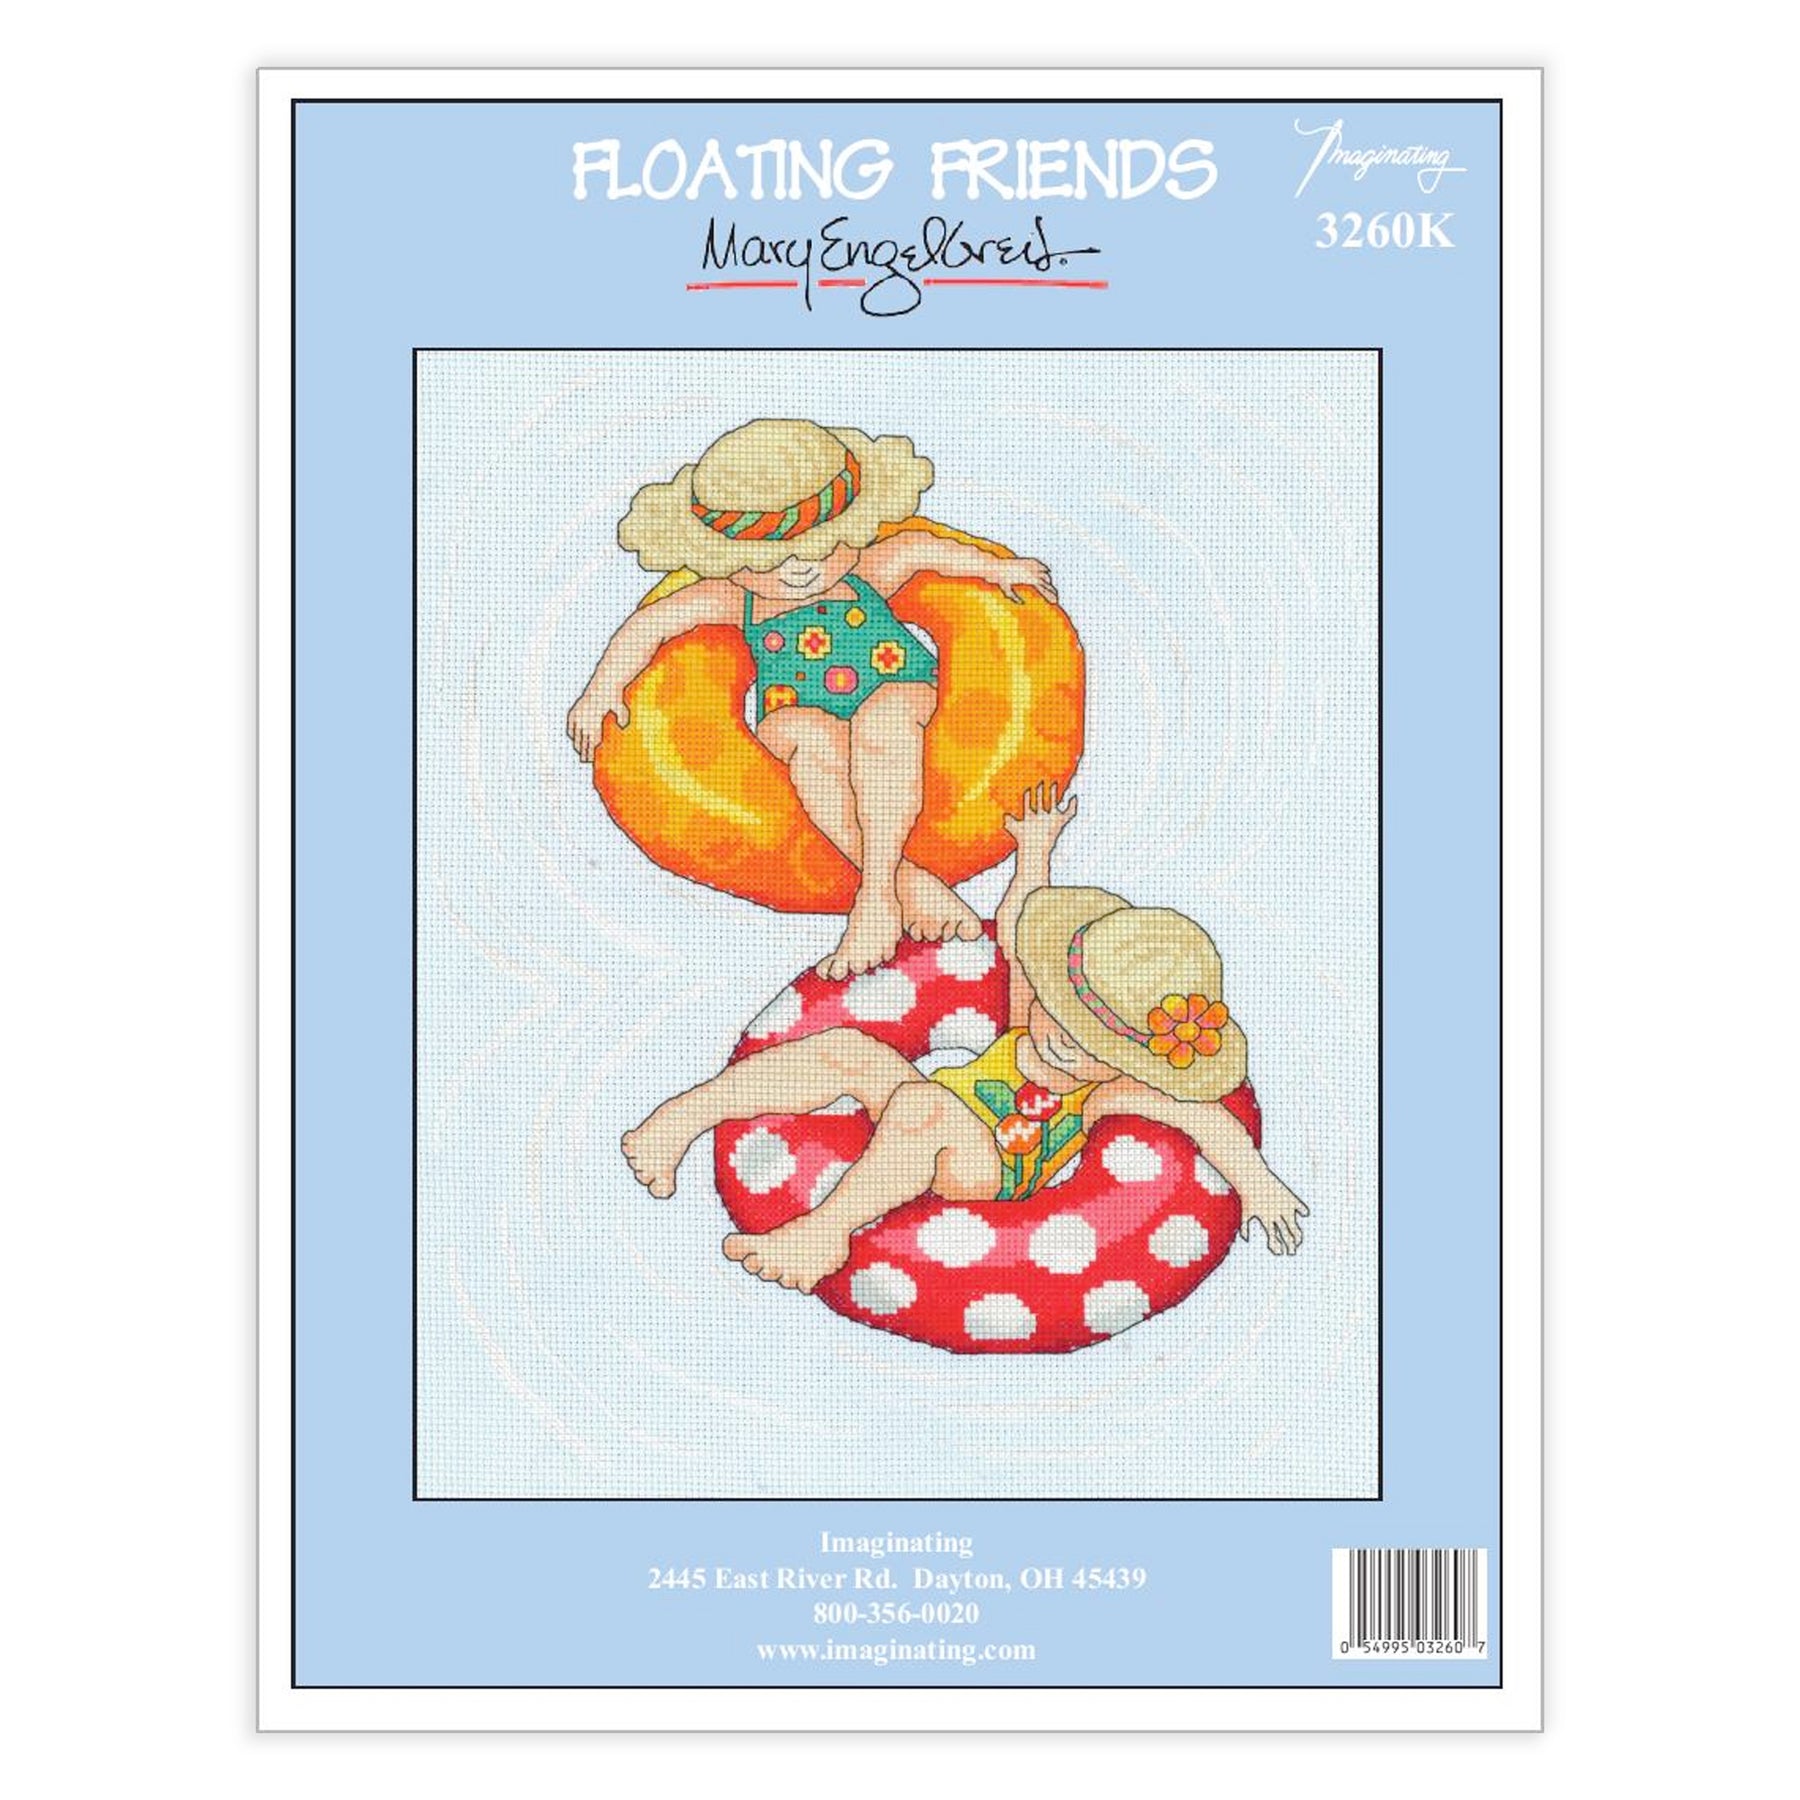 Floating Friends Counted Cross Stitch Kit - Needlework Projects